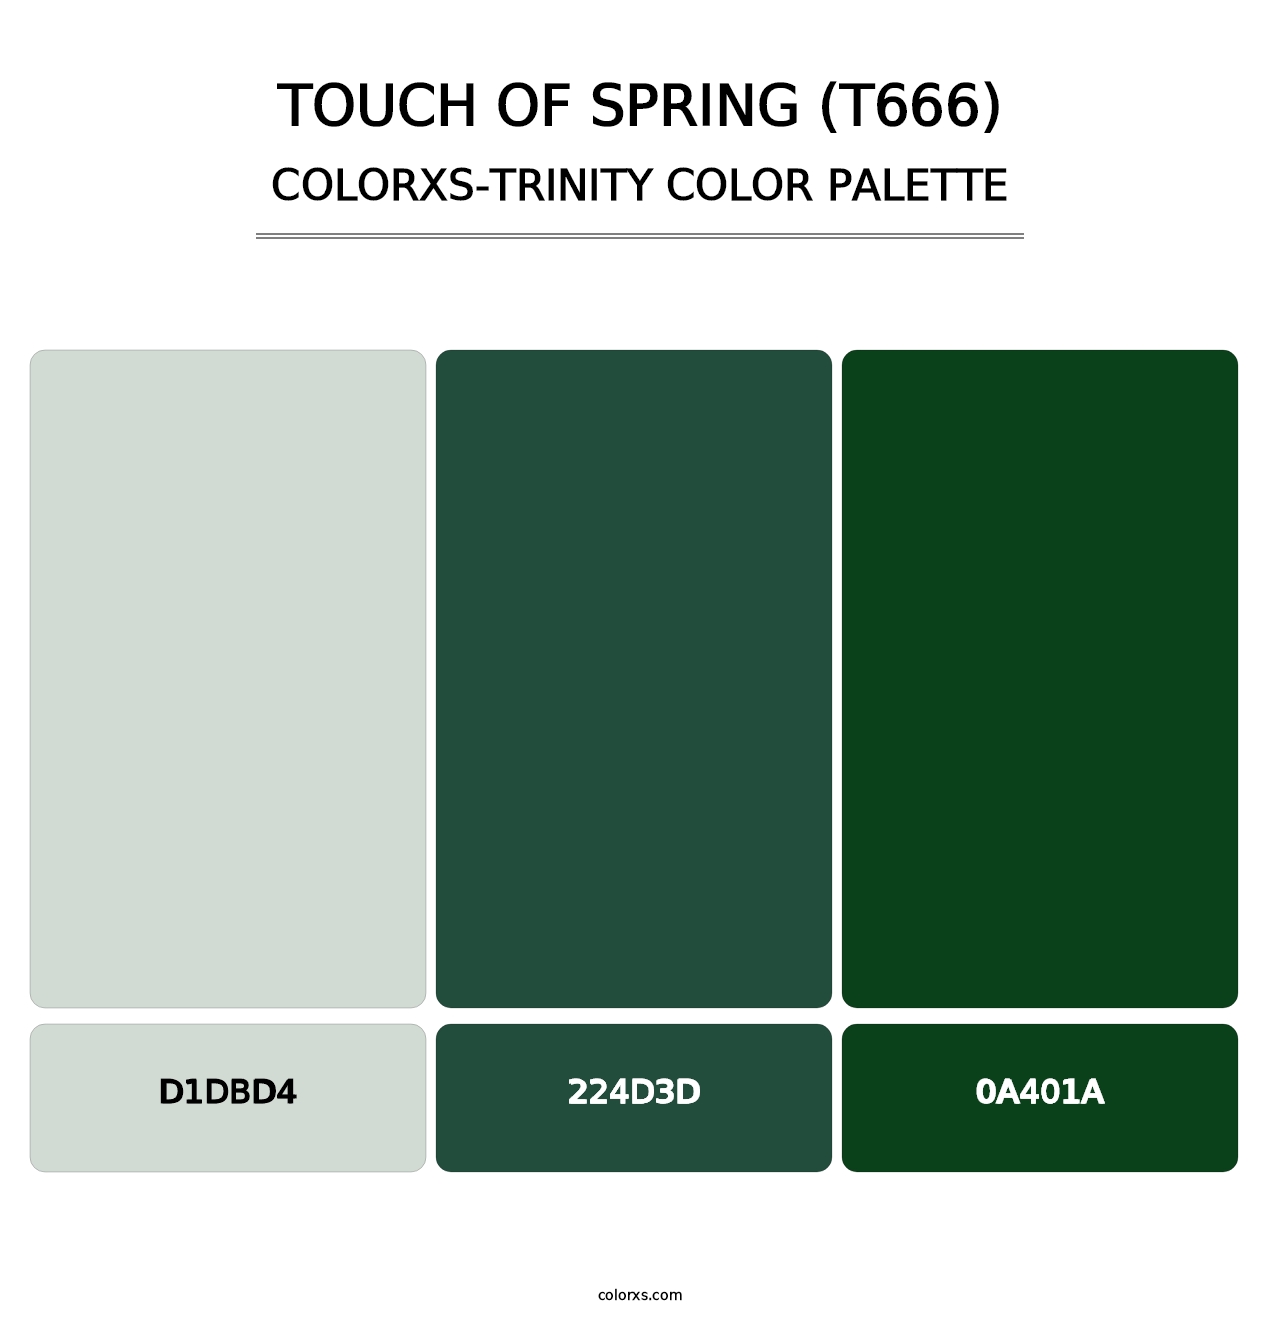 Touch of Spring (T666) - Colorxs Trinity Palette